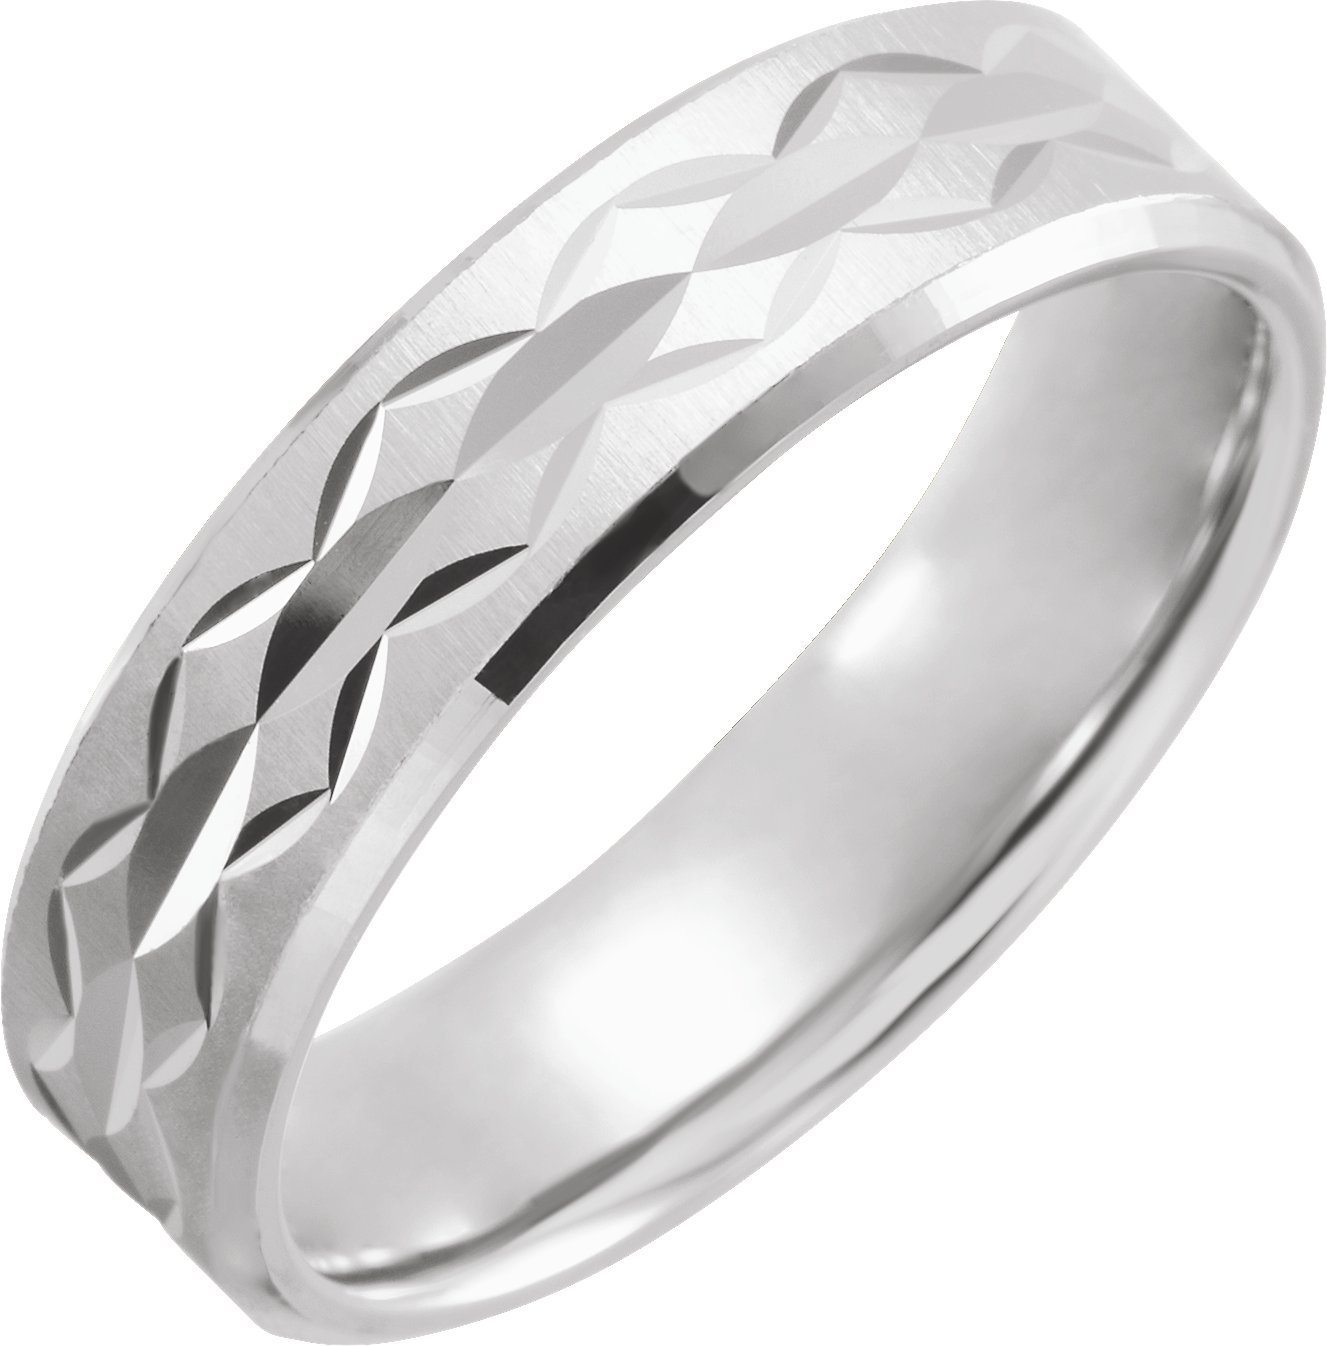 Continuum Sterling Silver 6 mm Design Band with Satin Polished Finish Size 11 Ref 16486075